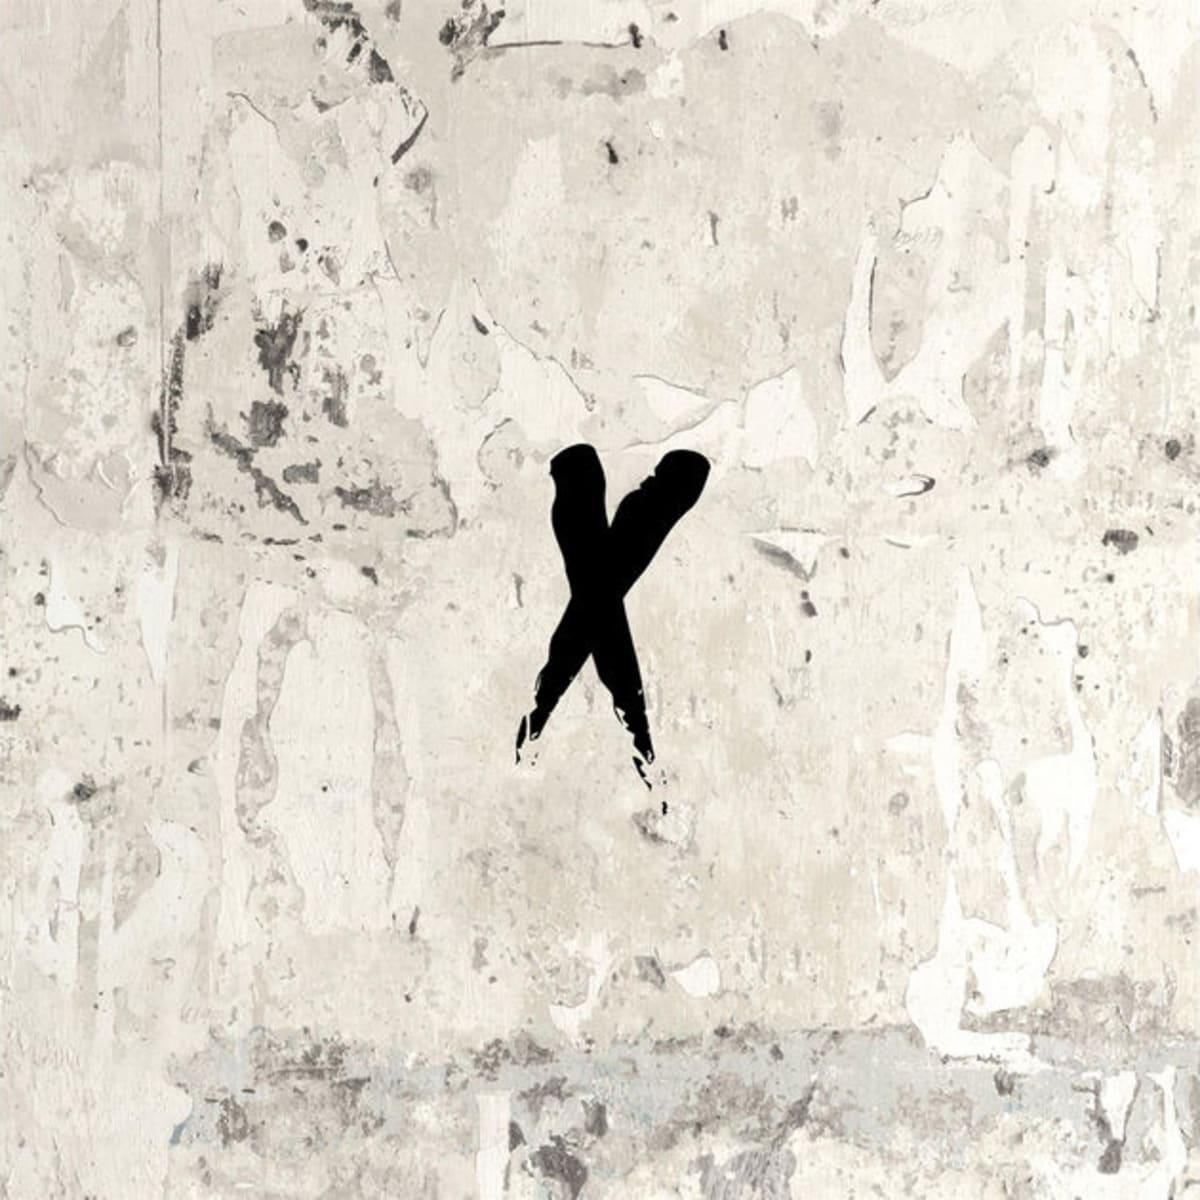 NxWorries Drop New Album 'Yes Lawd!' a Week Early Exclusively on Apple